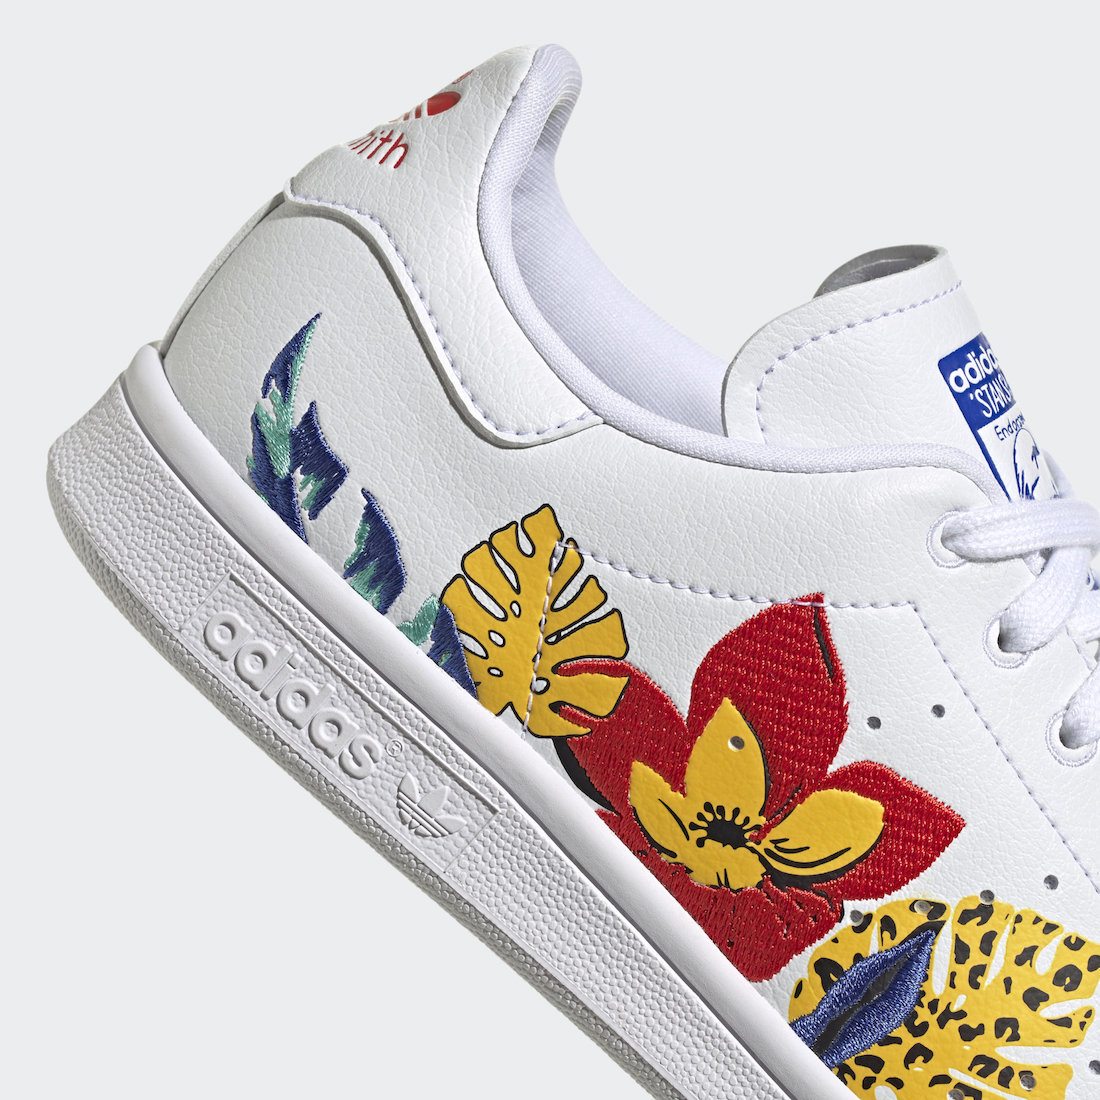 HER Studio London adidas Stan Smith FY5090 Release Date